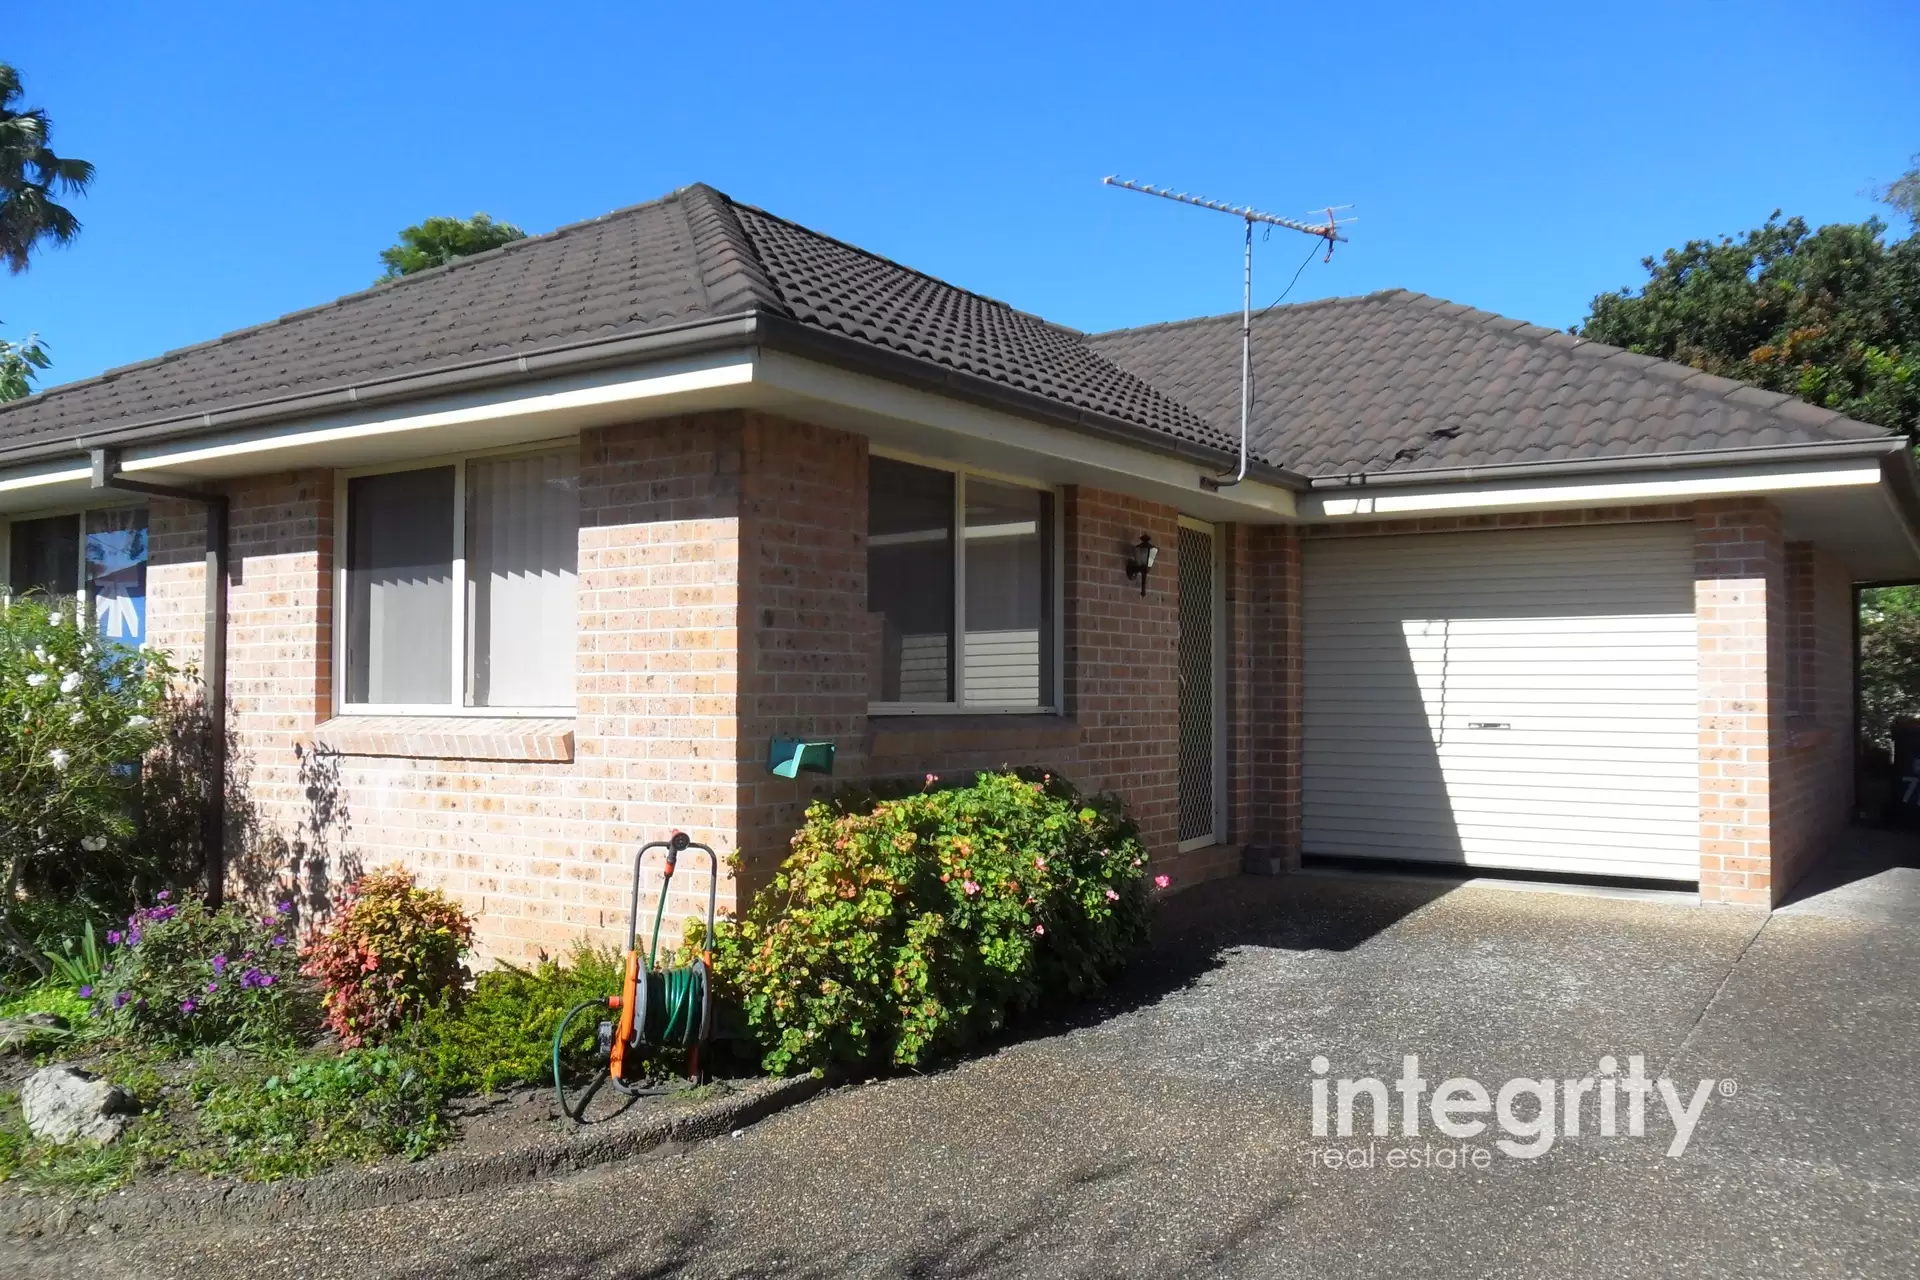 7b View Street, Nowra Leased by Integrity Real Estate